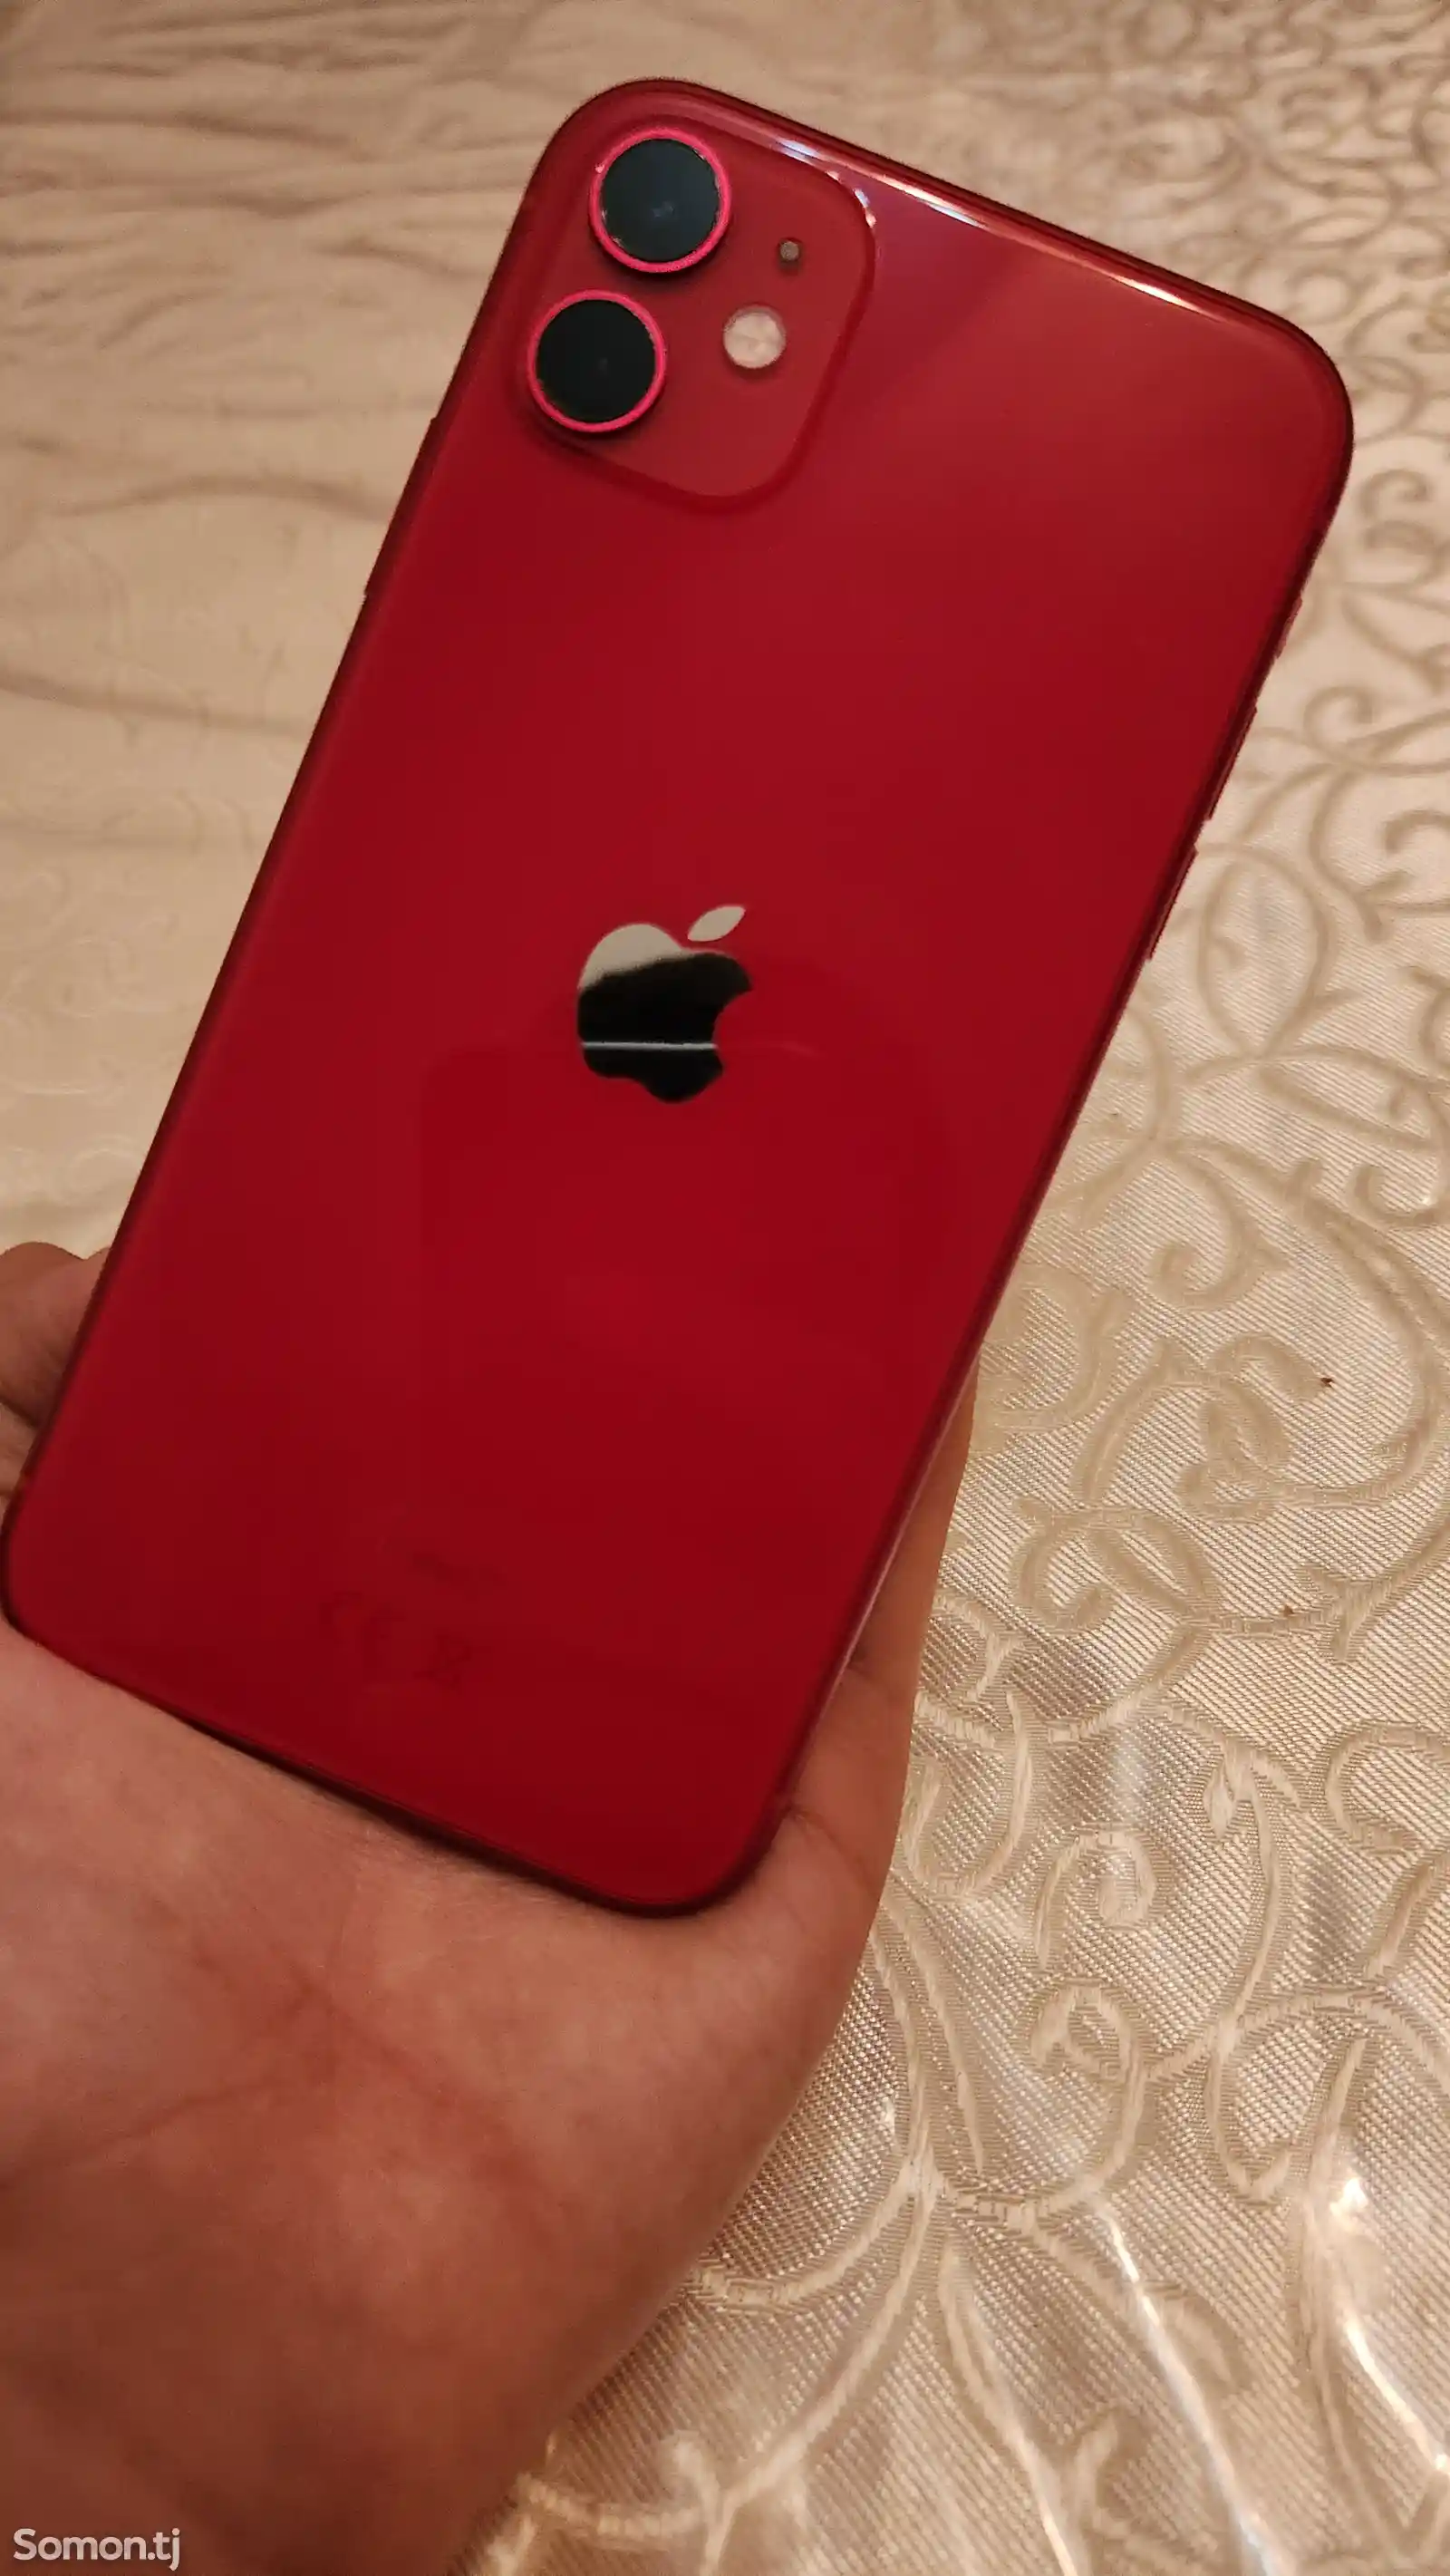 Apple iPhone 11, 64 gb, Product Red-2